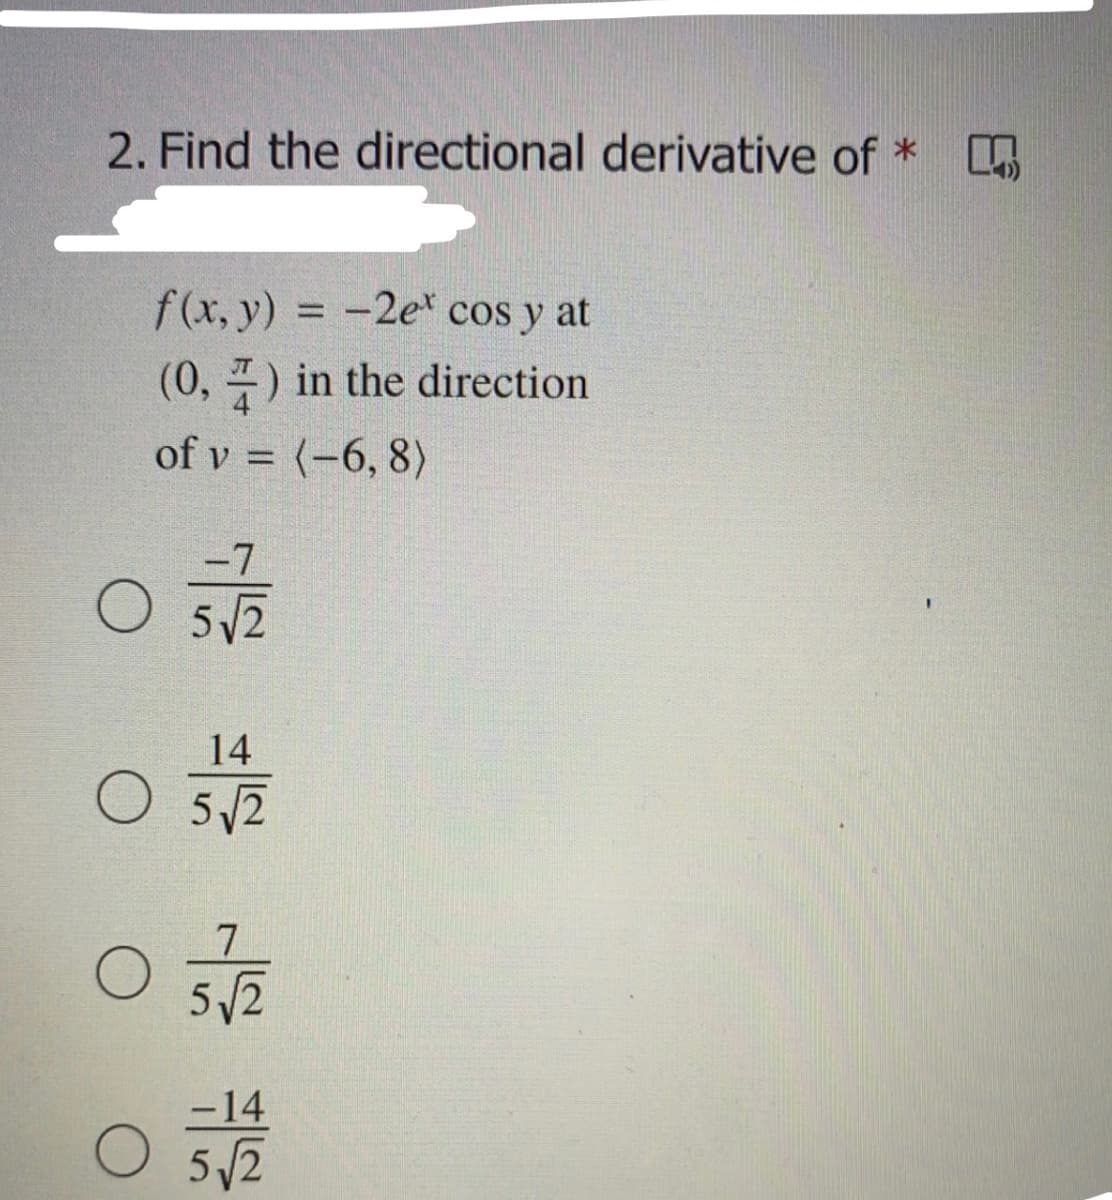 2. Find the directional derivative of *
f(x, y) = -2et cos y at
%3D
(0, ) in the direction
of v = (-6, 8)
-7
14
5/2
5/2
-14
5/2
